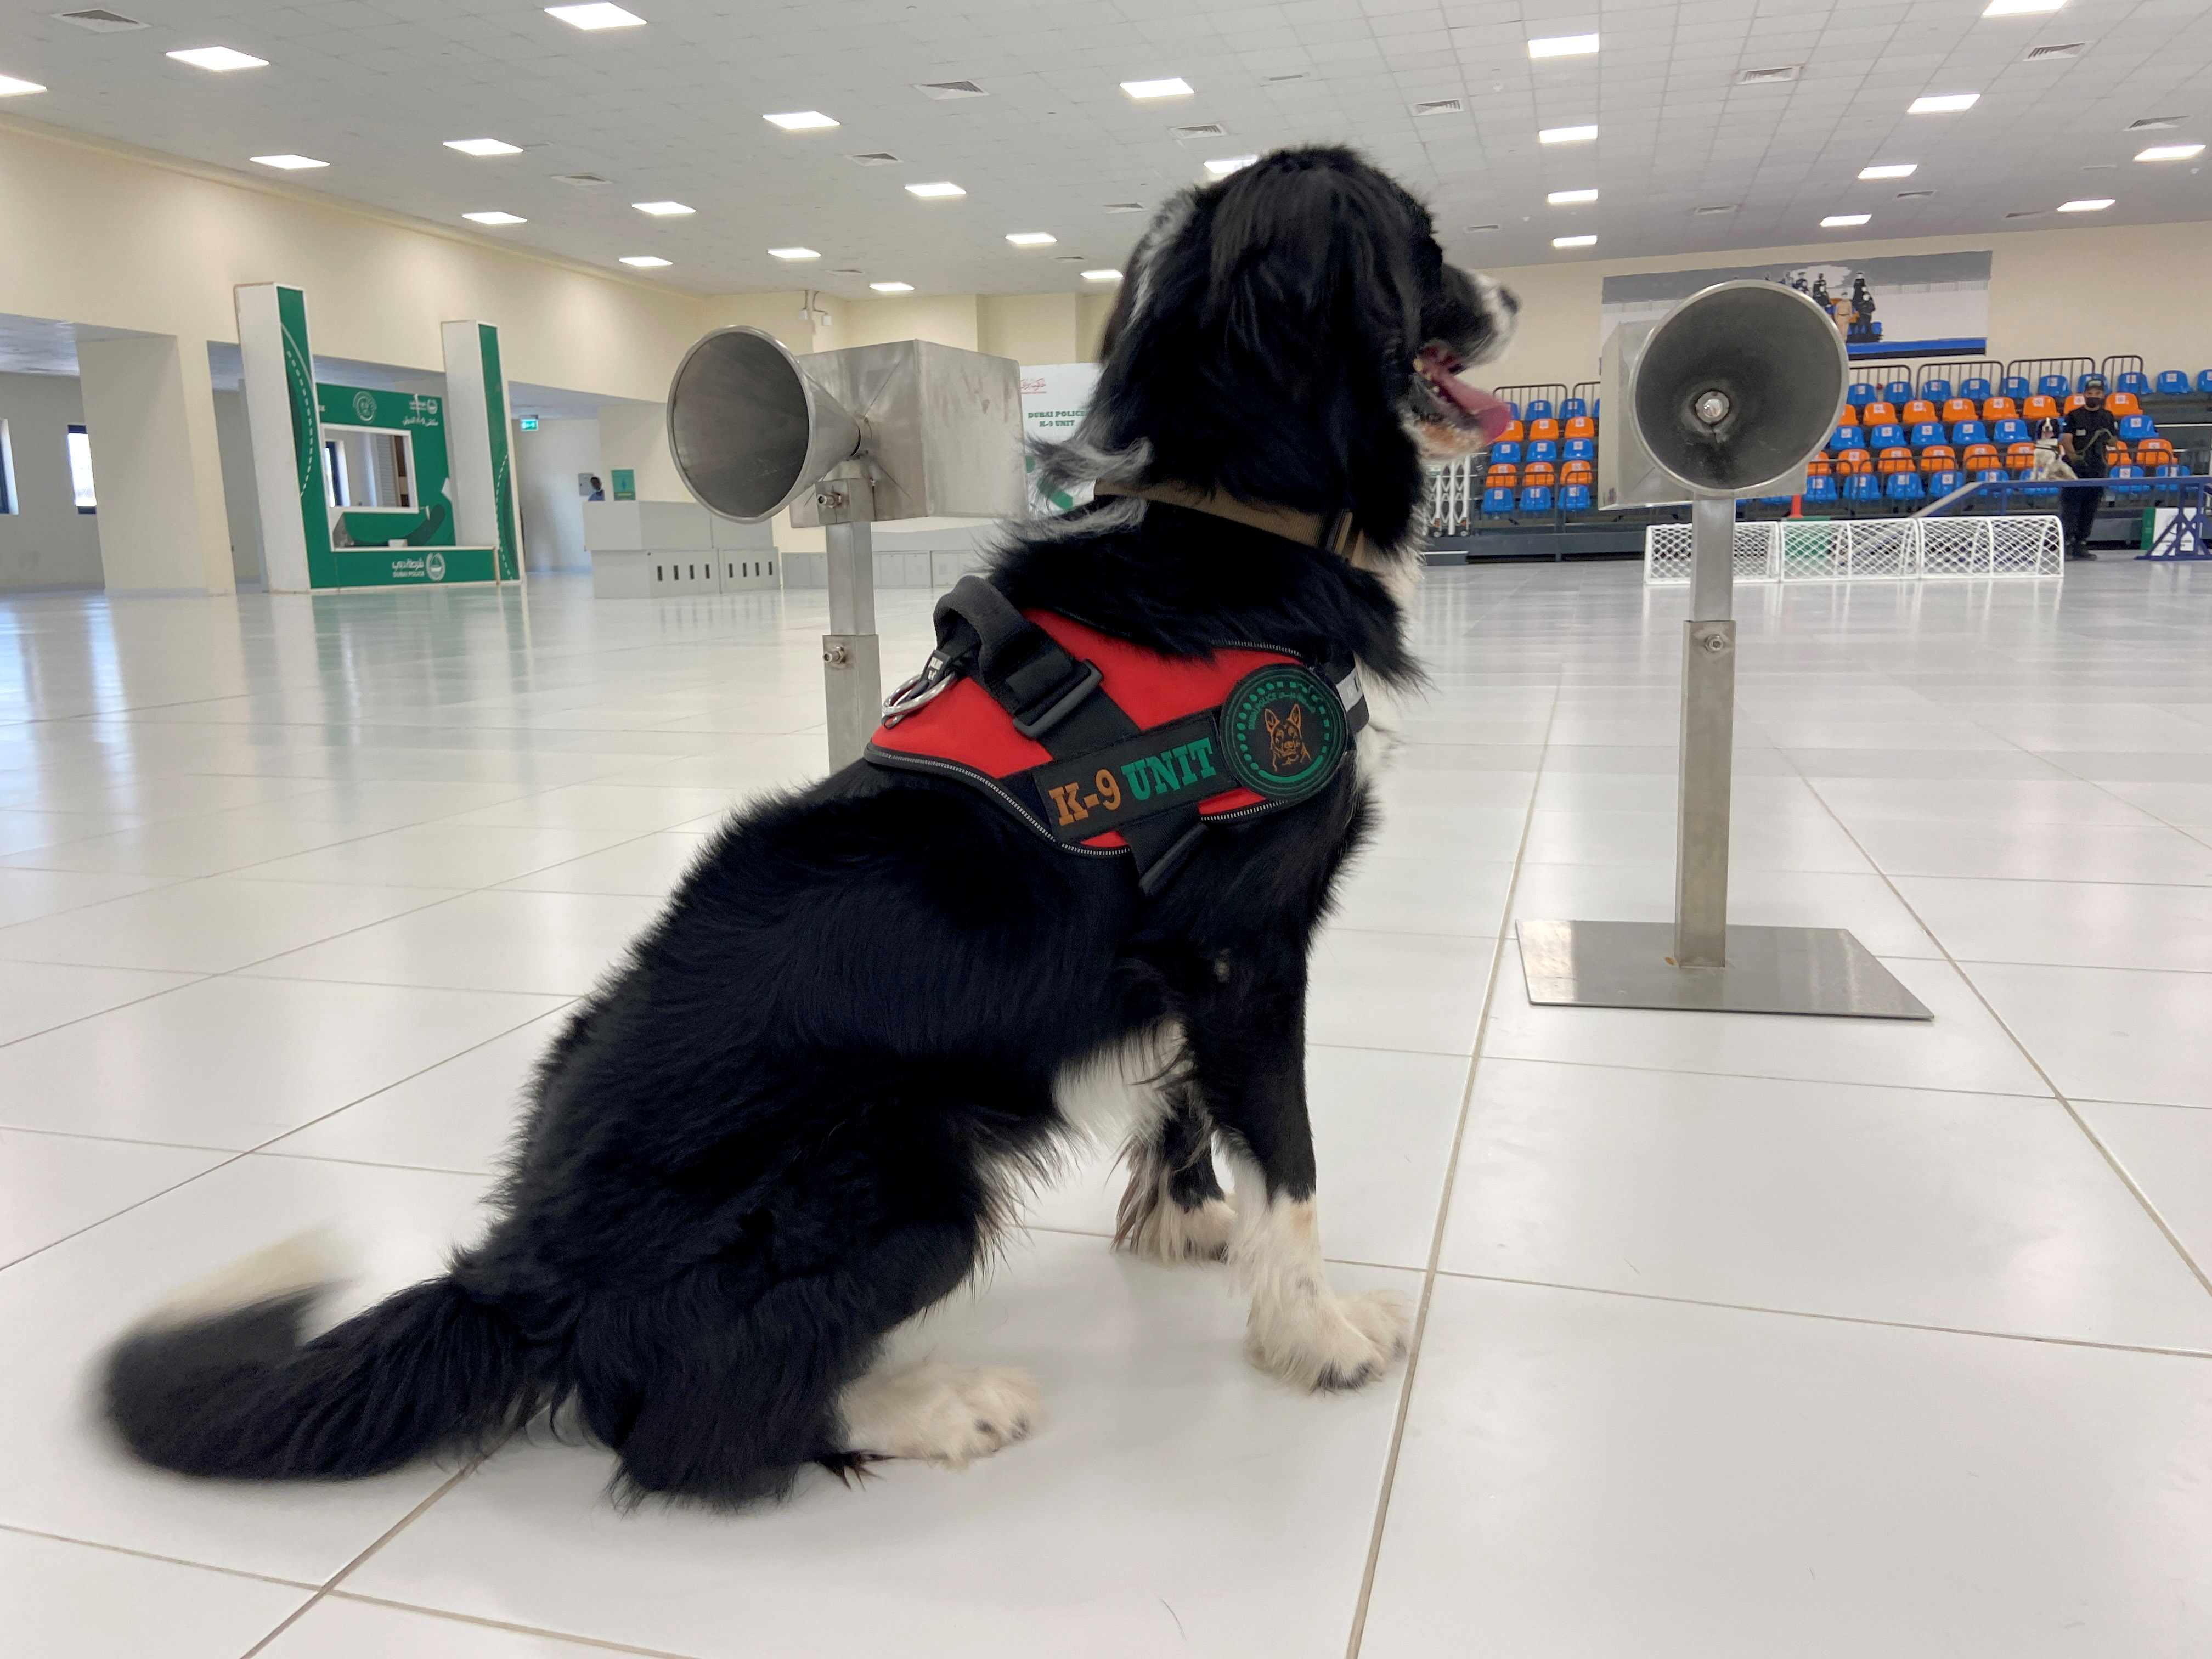 A dog that has been trained by Dubai Police K-9 unit to sniff out COVID-19 is pictured in Dubai, United Arab Emirates, September 13, 2021. REUTERS/Abdel Hadi Ramahi